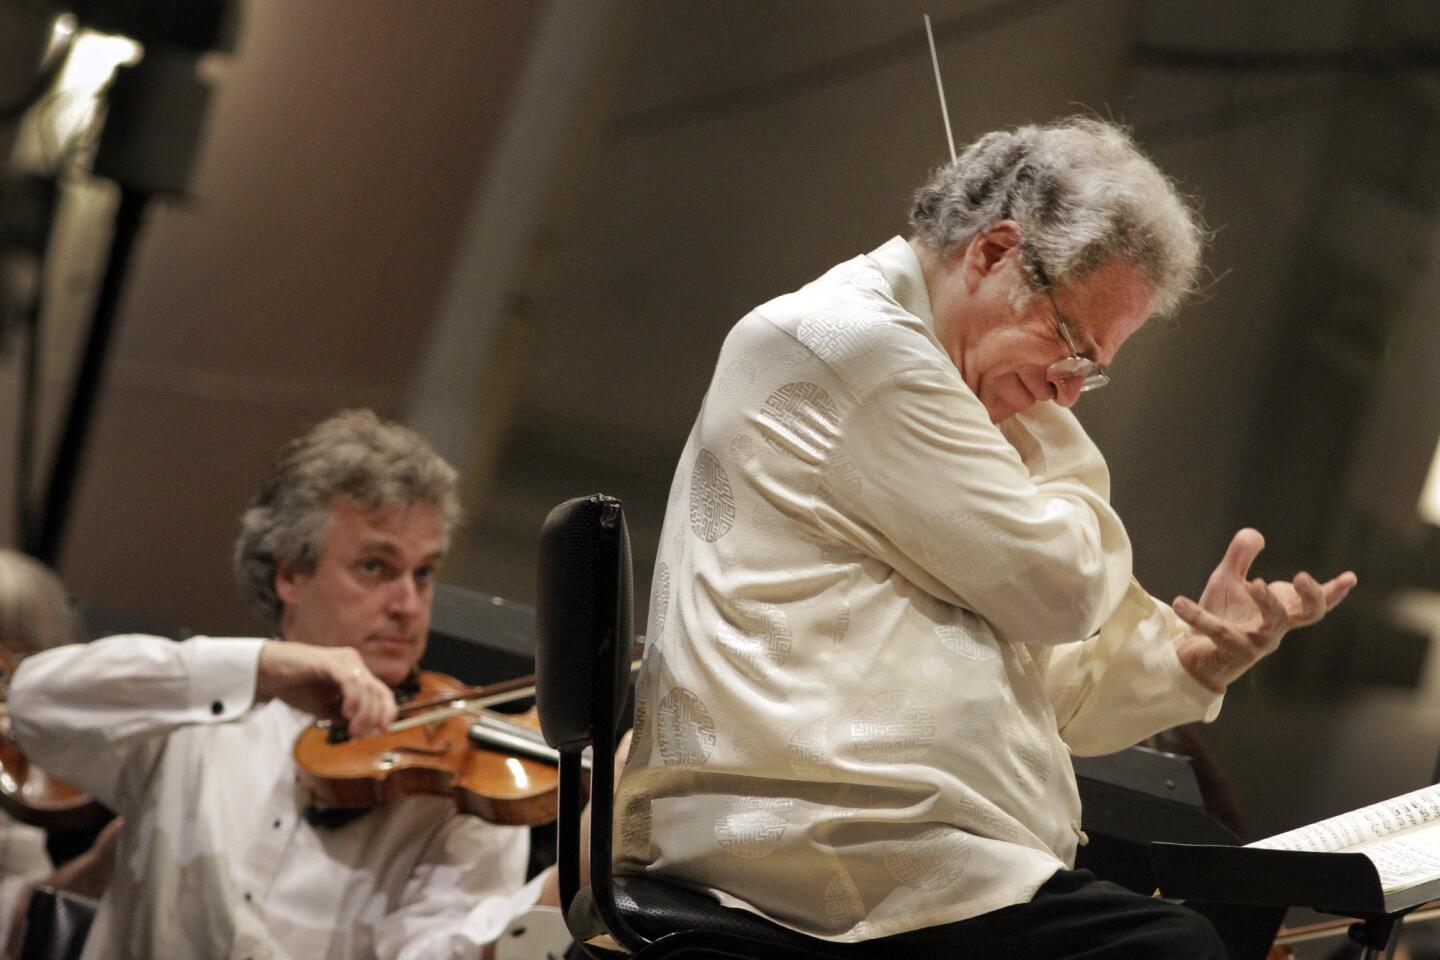 Arts and culture in pictures by The Times | Itzhak Perlman at the Hollywood Bowl